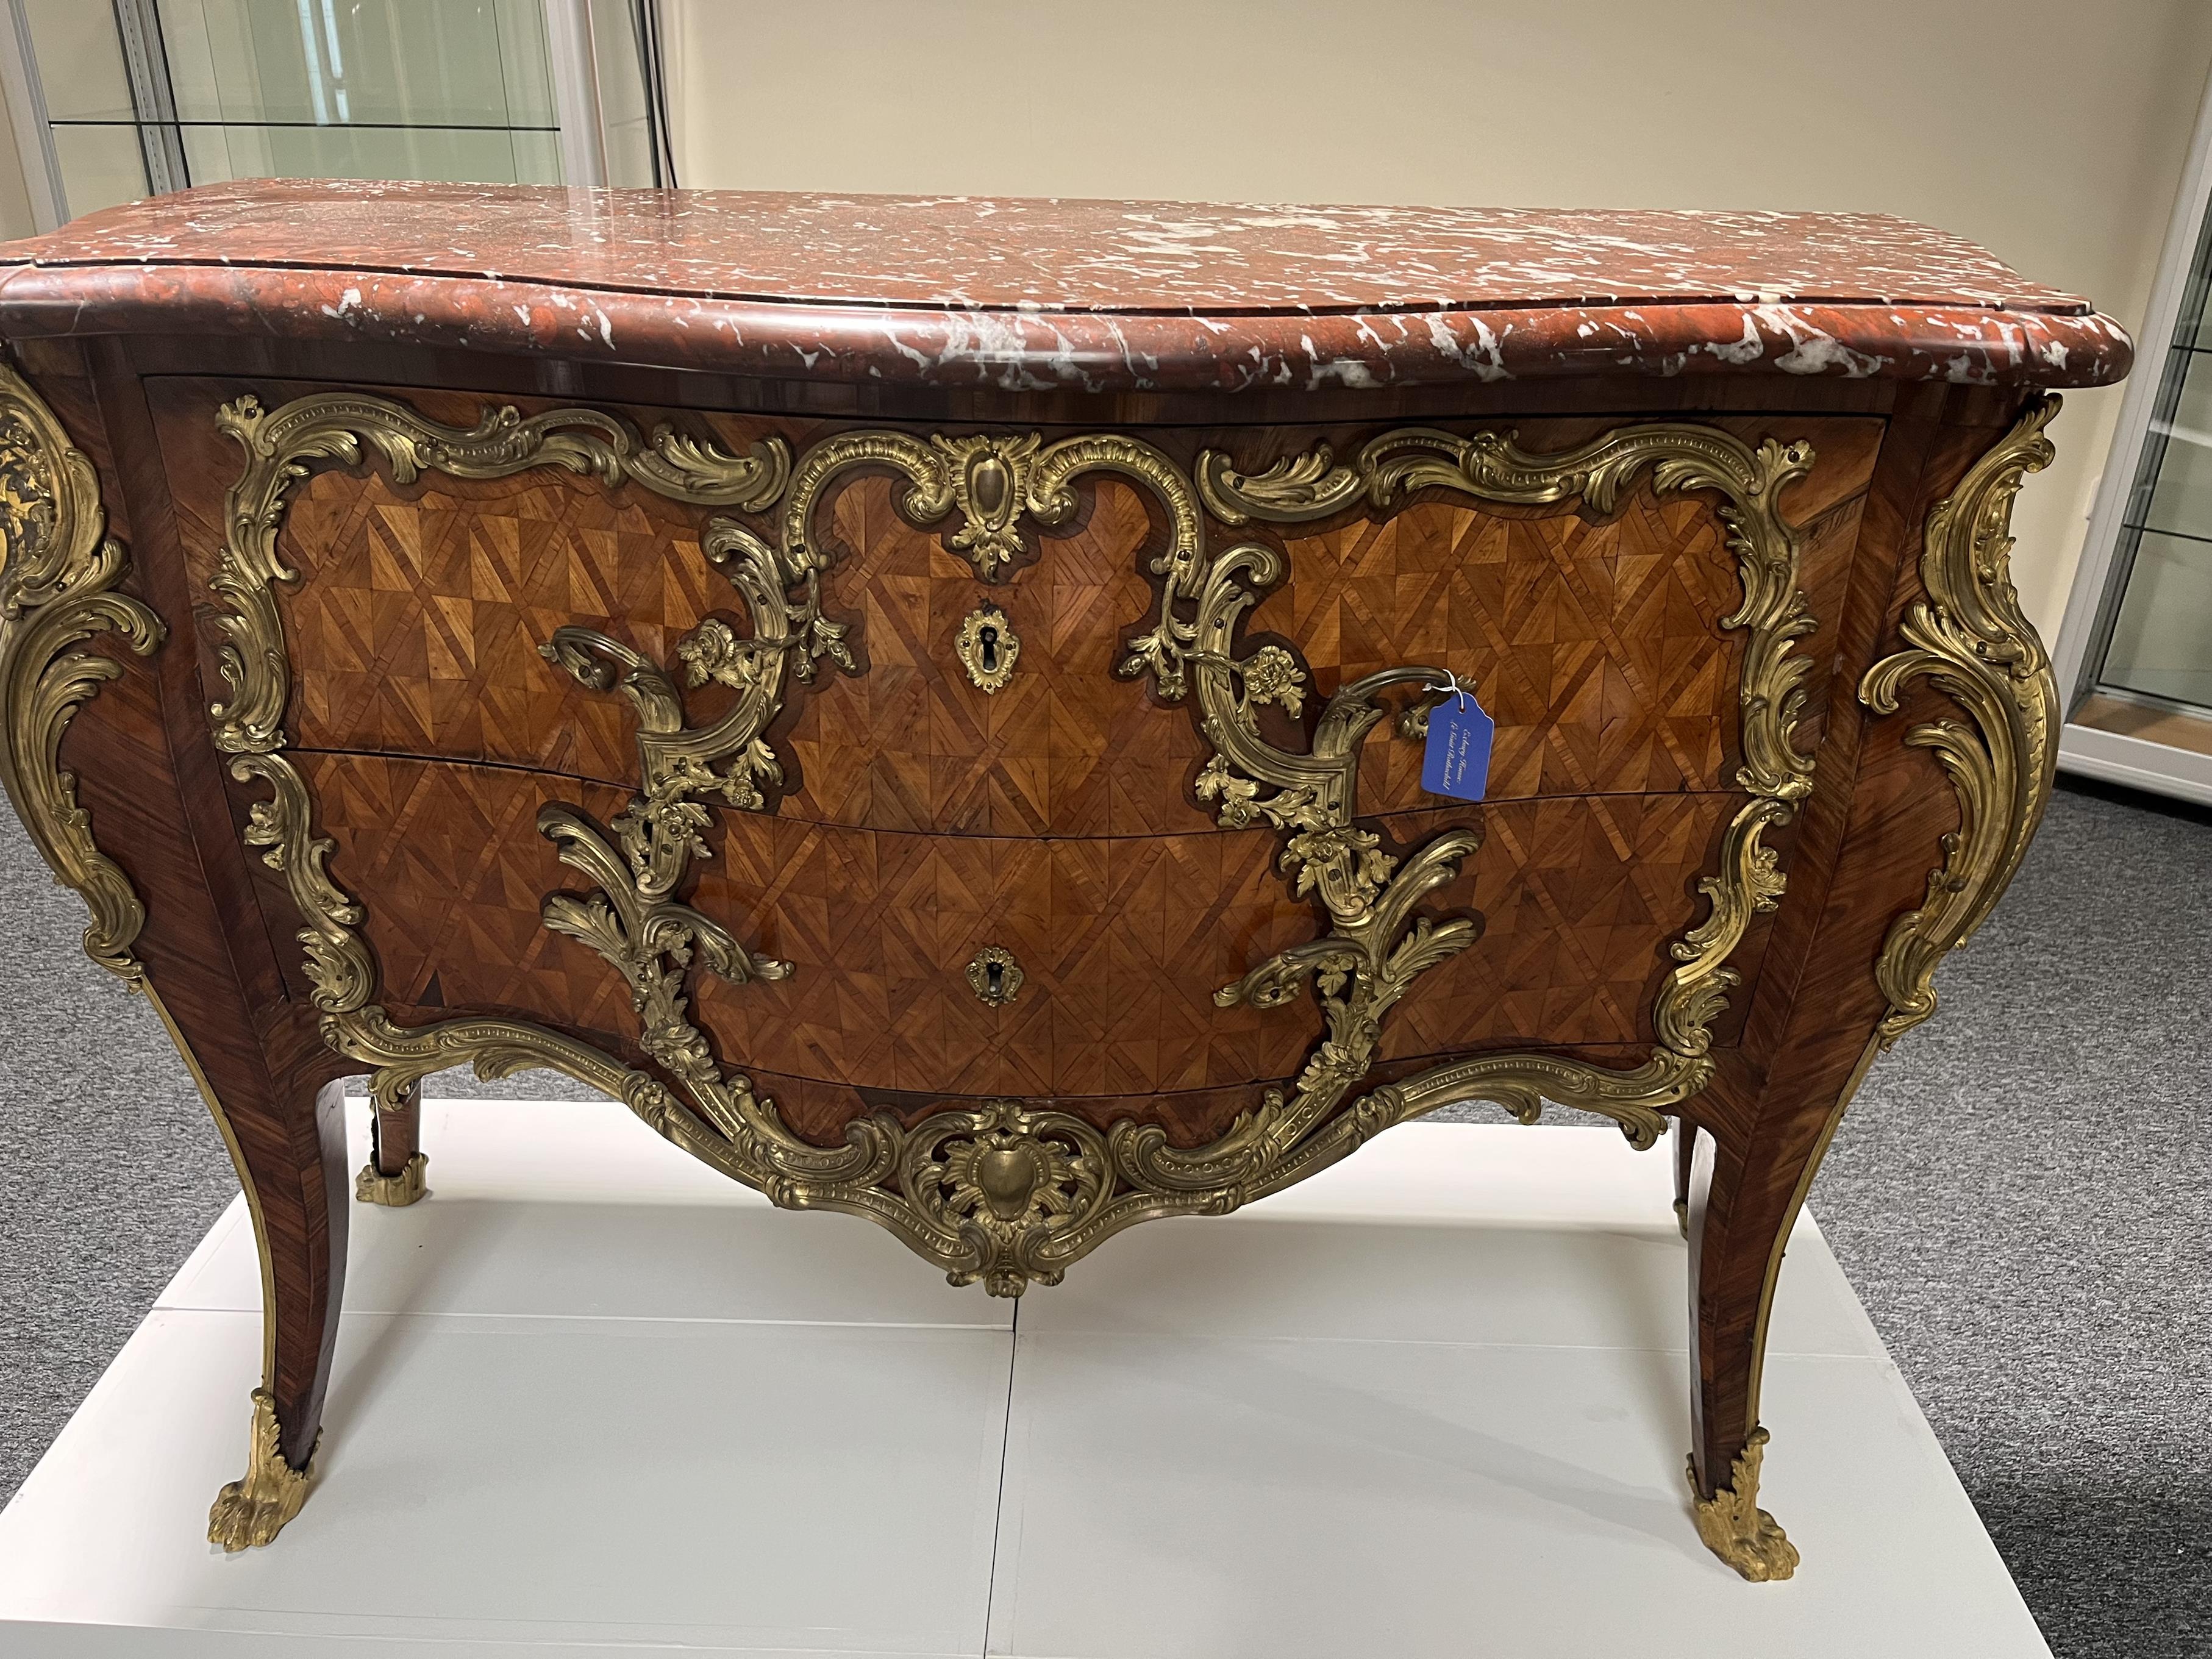 A FINE FRENCH LOUIS XV KINGWOOD AND ORMOLU MOUNTED SERPENTINE BOMBE COMMODE ATTRIBUTED TO GILLES - Image 14 of 36